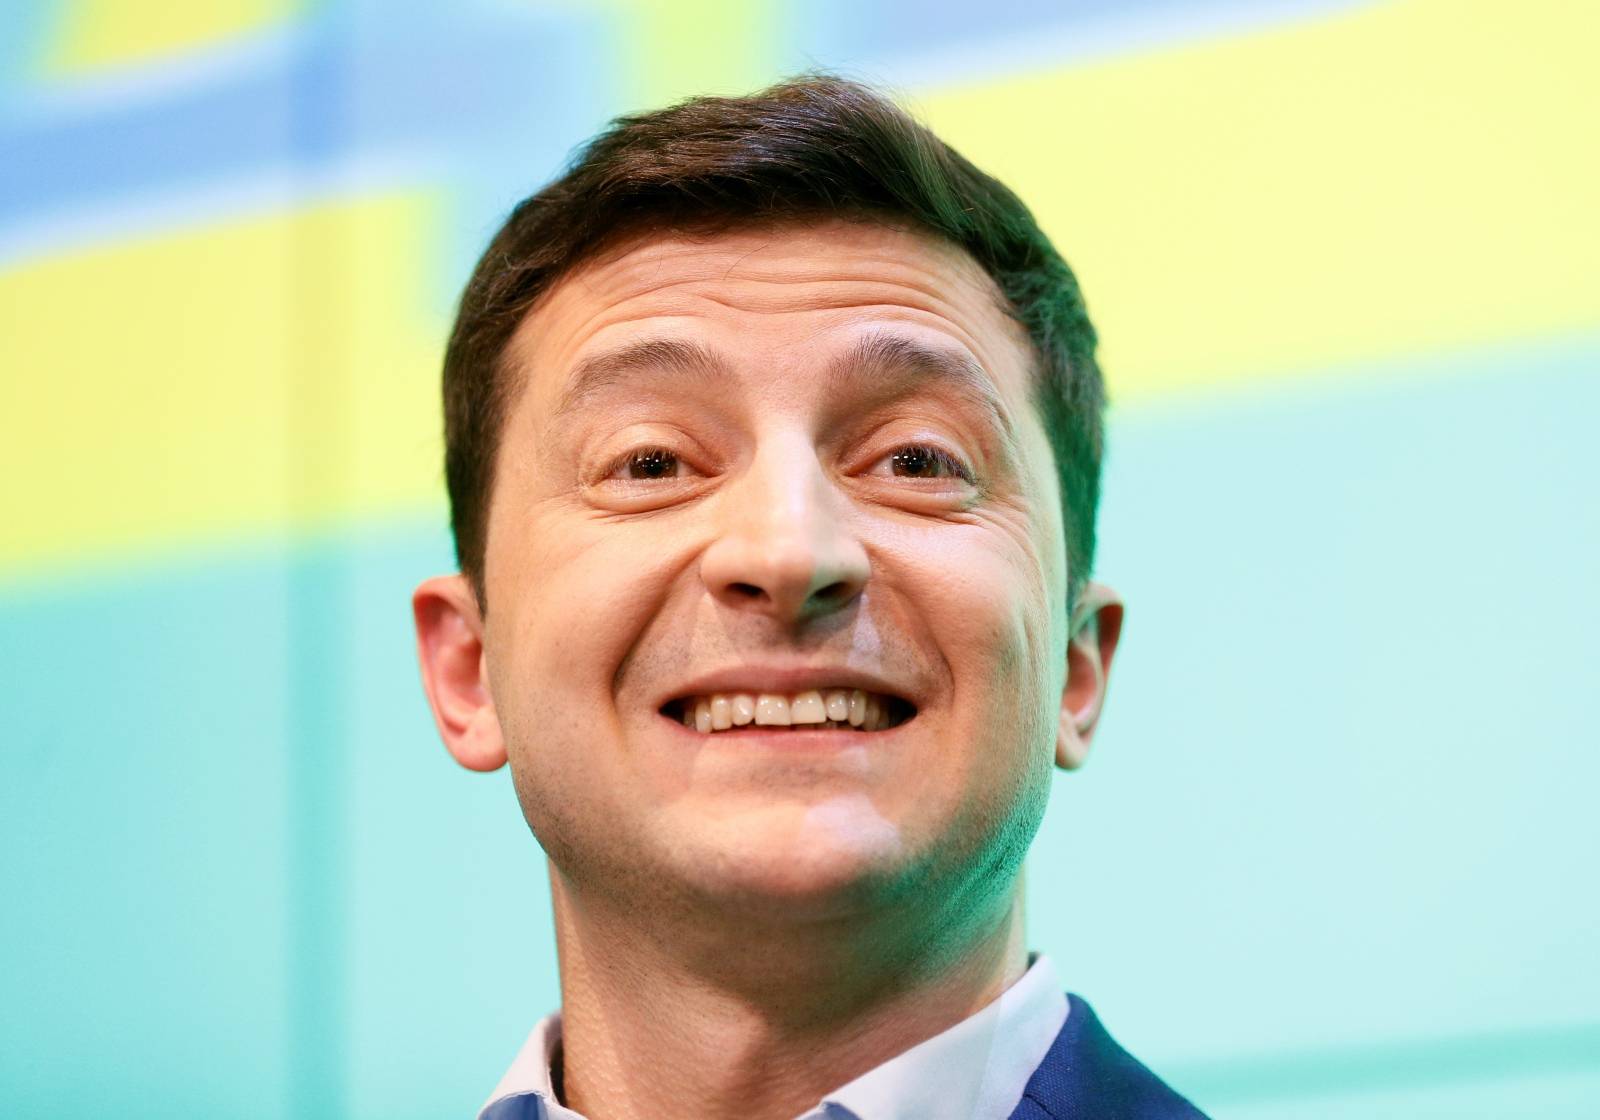 Ukrainian presidential candidate Zelenskiy reacts during a news conference in Kiev